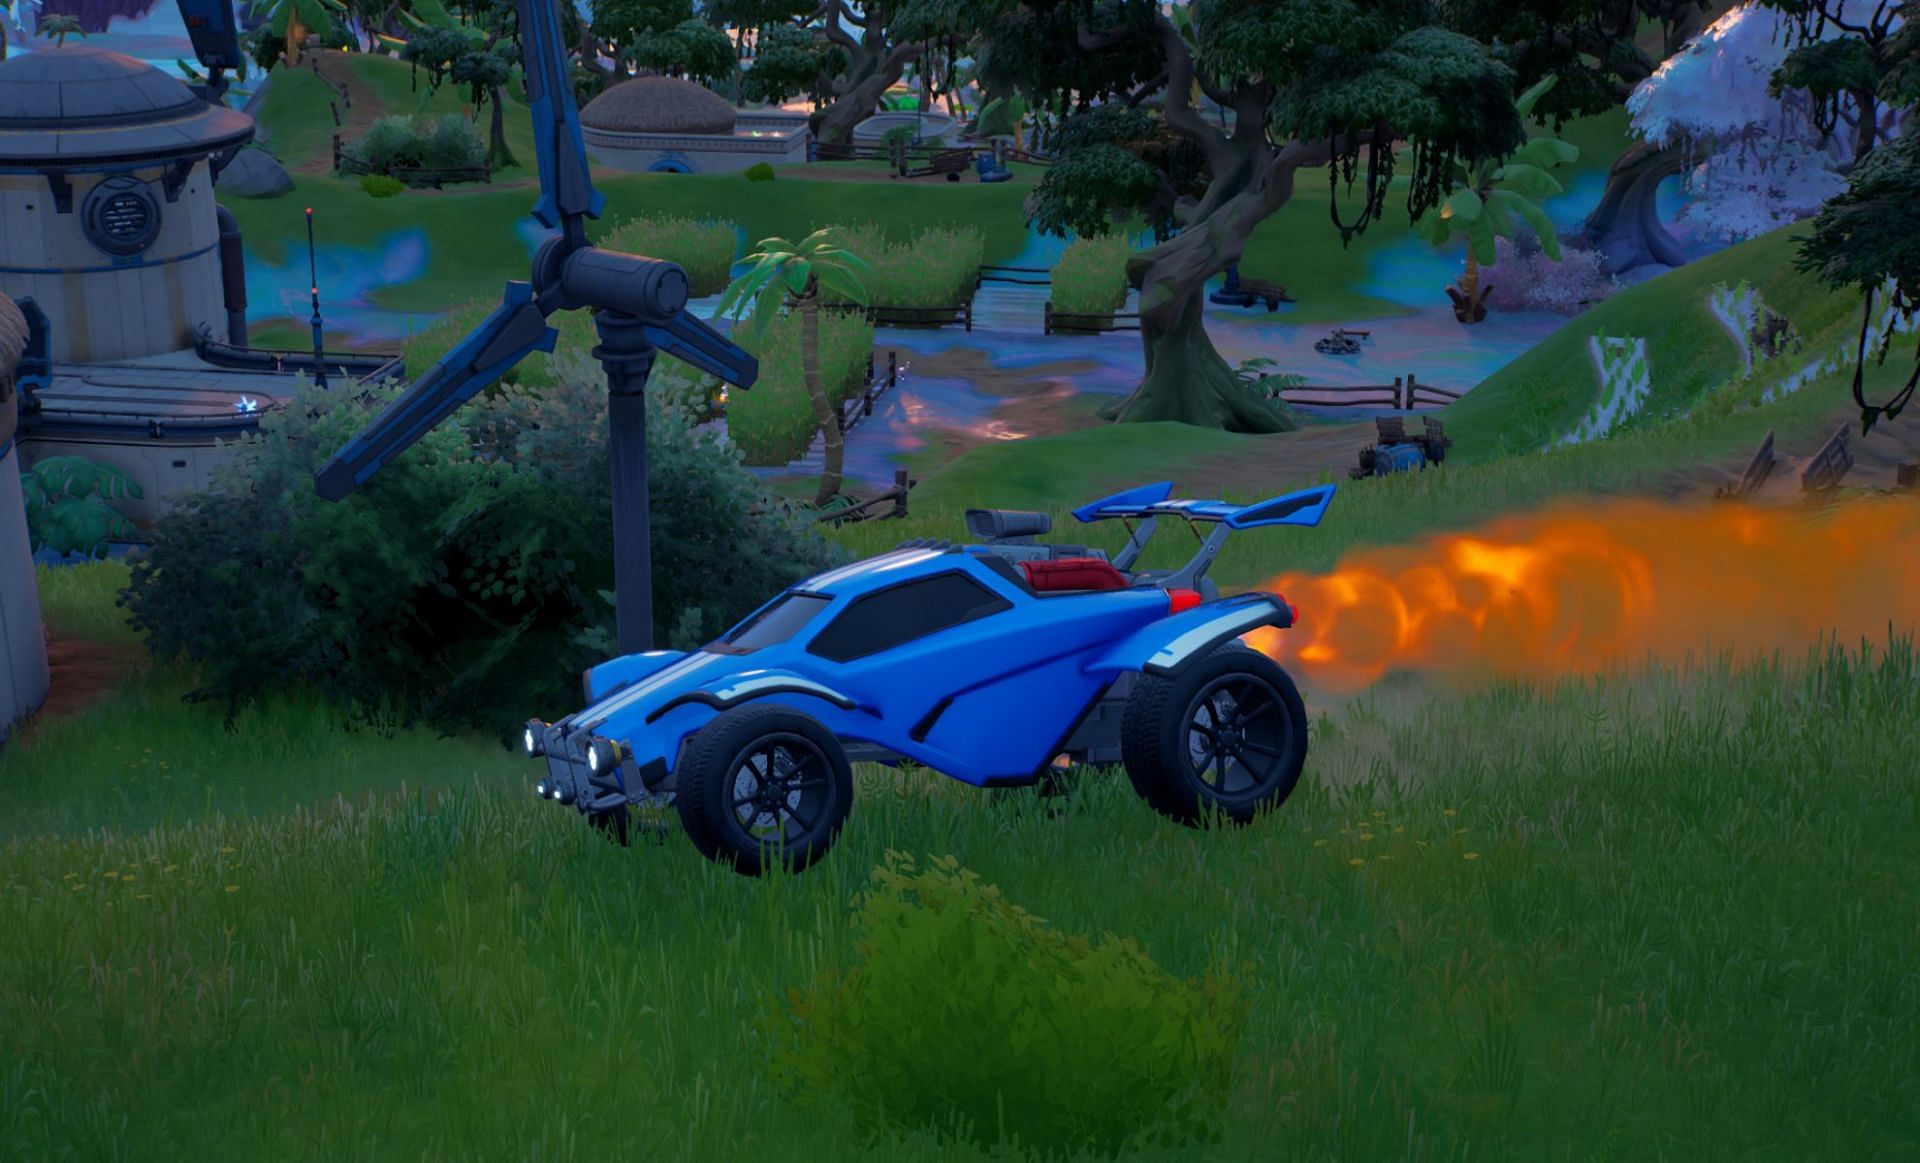 The Octane vehicle is now active in Fortnite (Image via Epic Games)